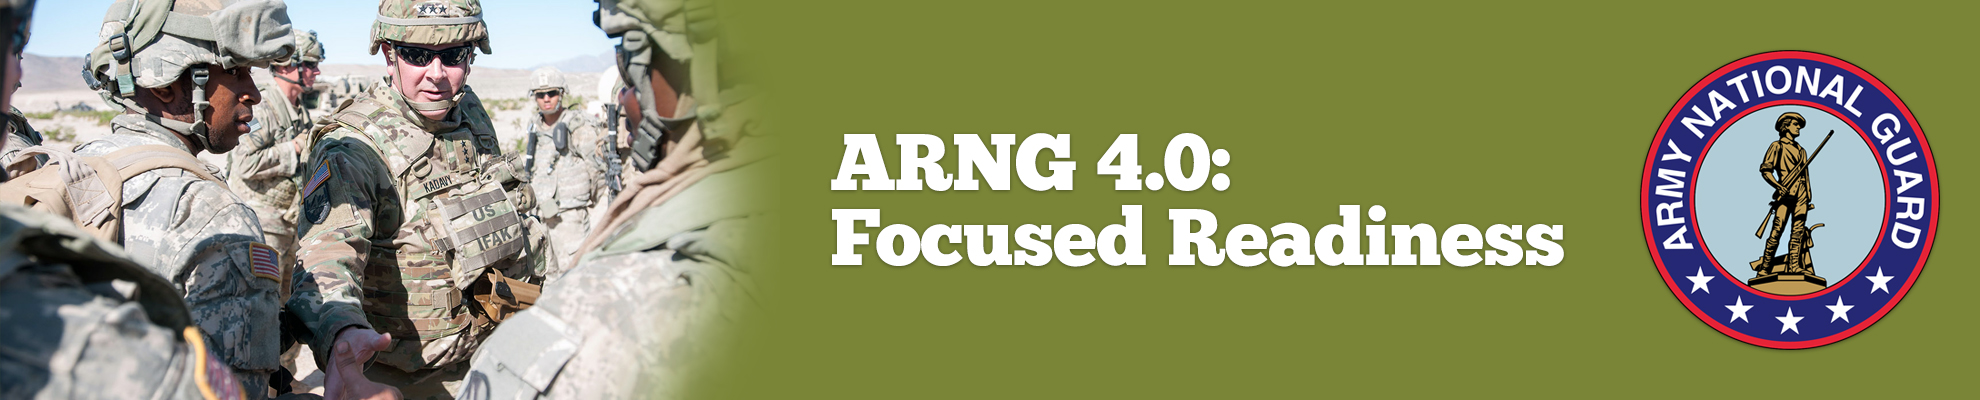 ARNG 4.0: Focused Readiness